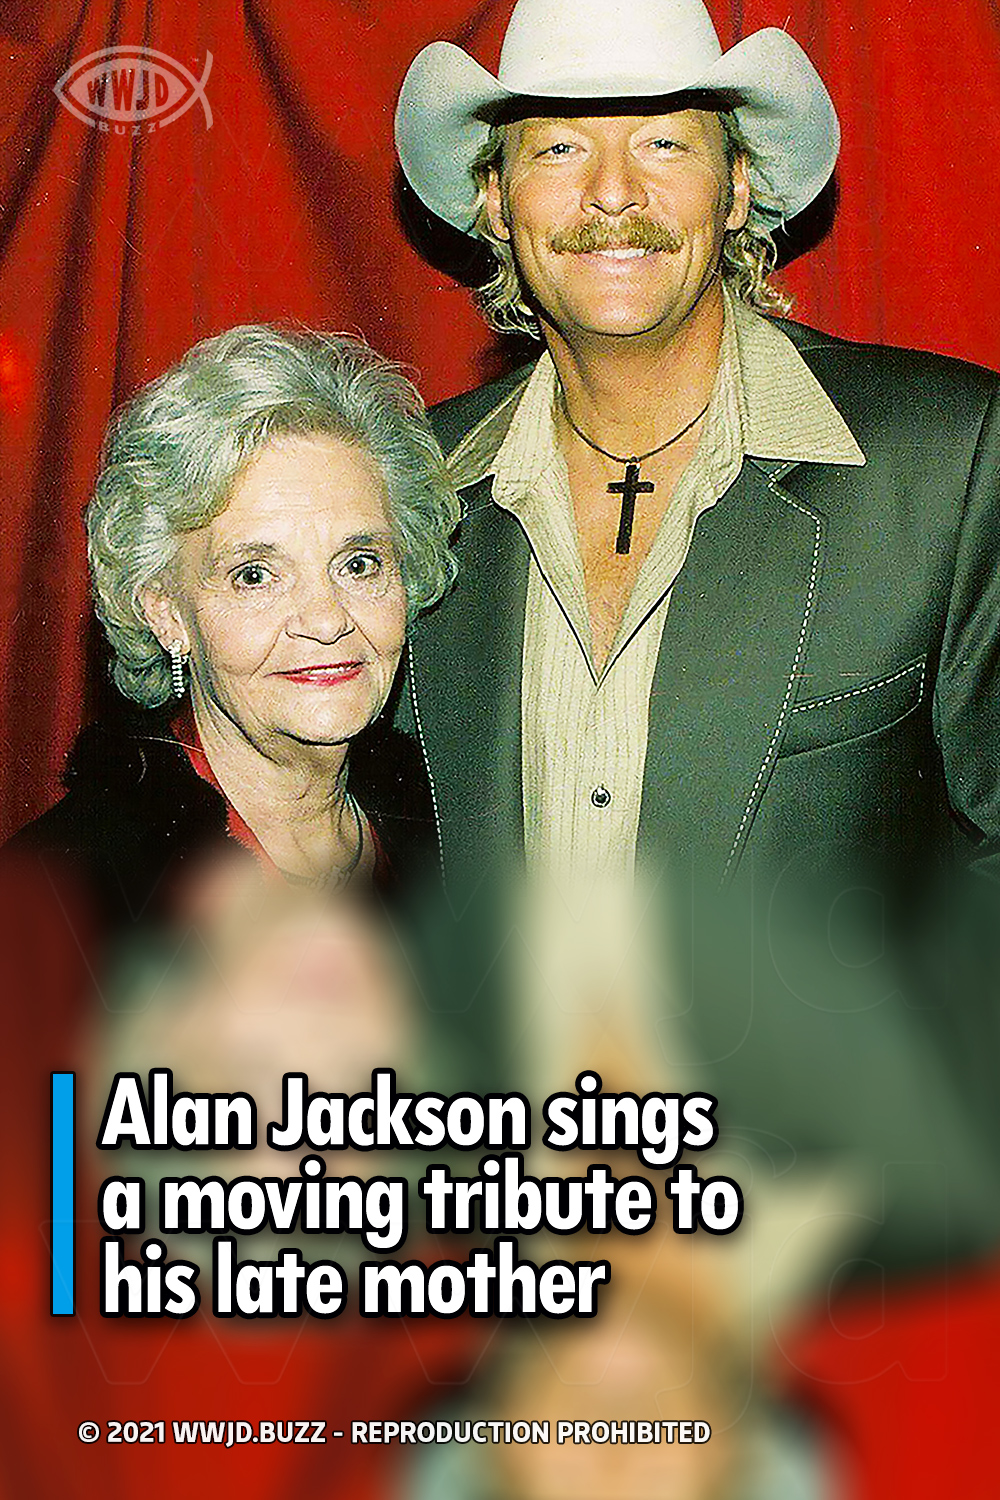 Alan Jackson sings a moving tribute to his late mother